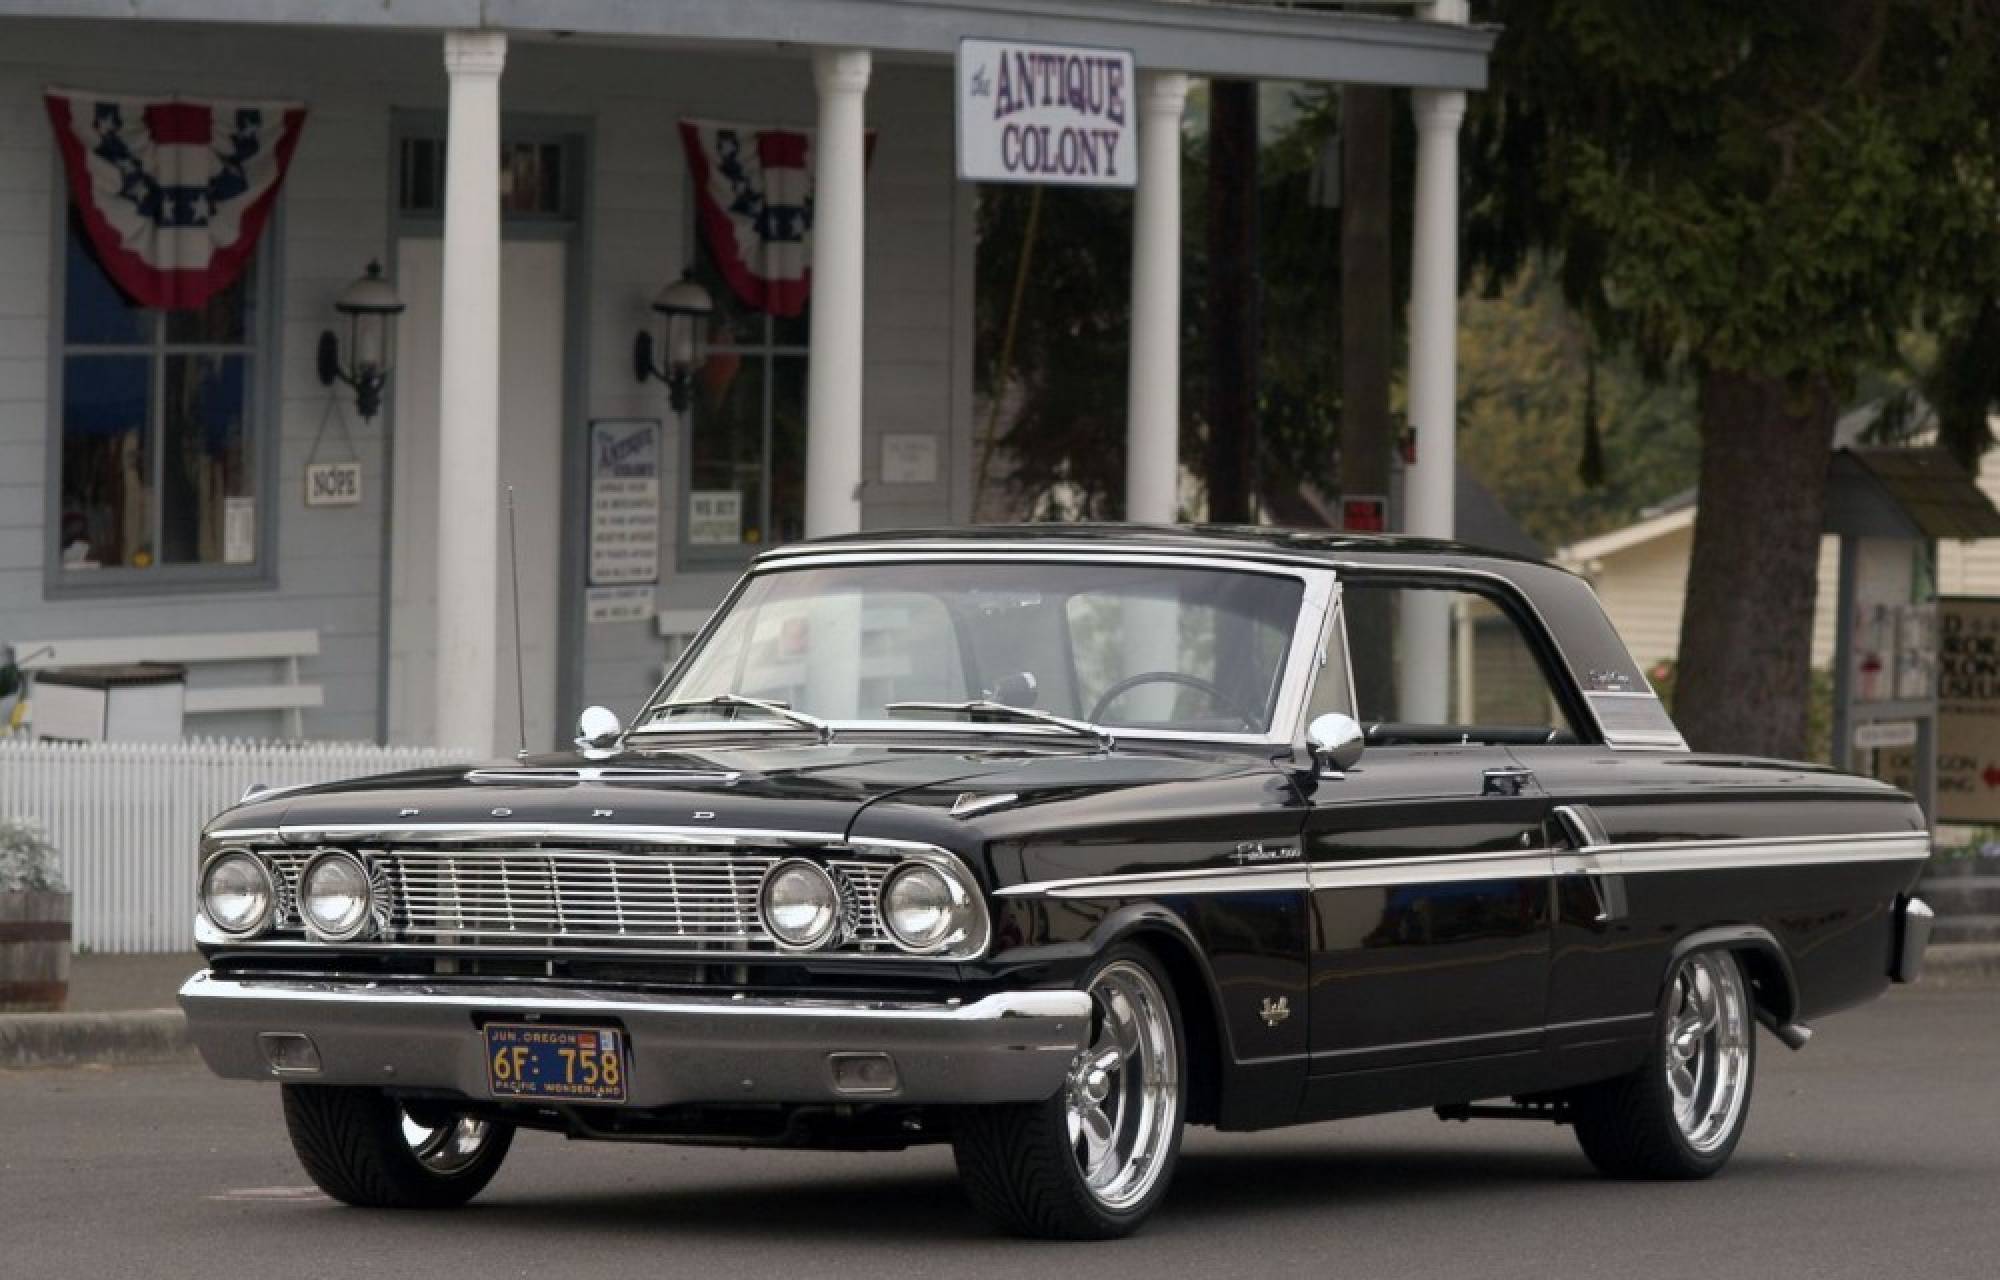 Amazing 1964 Ford Fairlane Pictures & Backgrounds